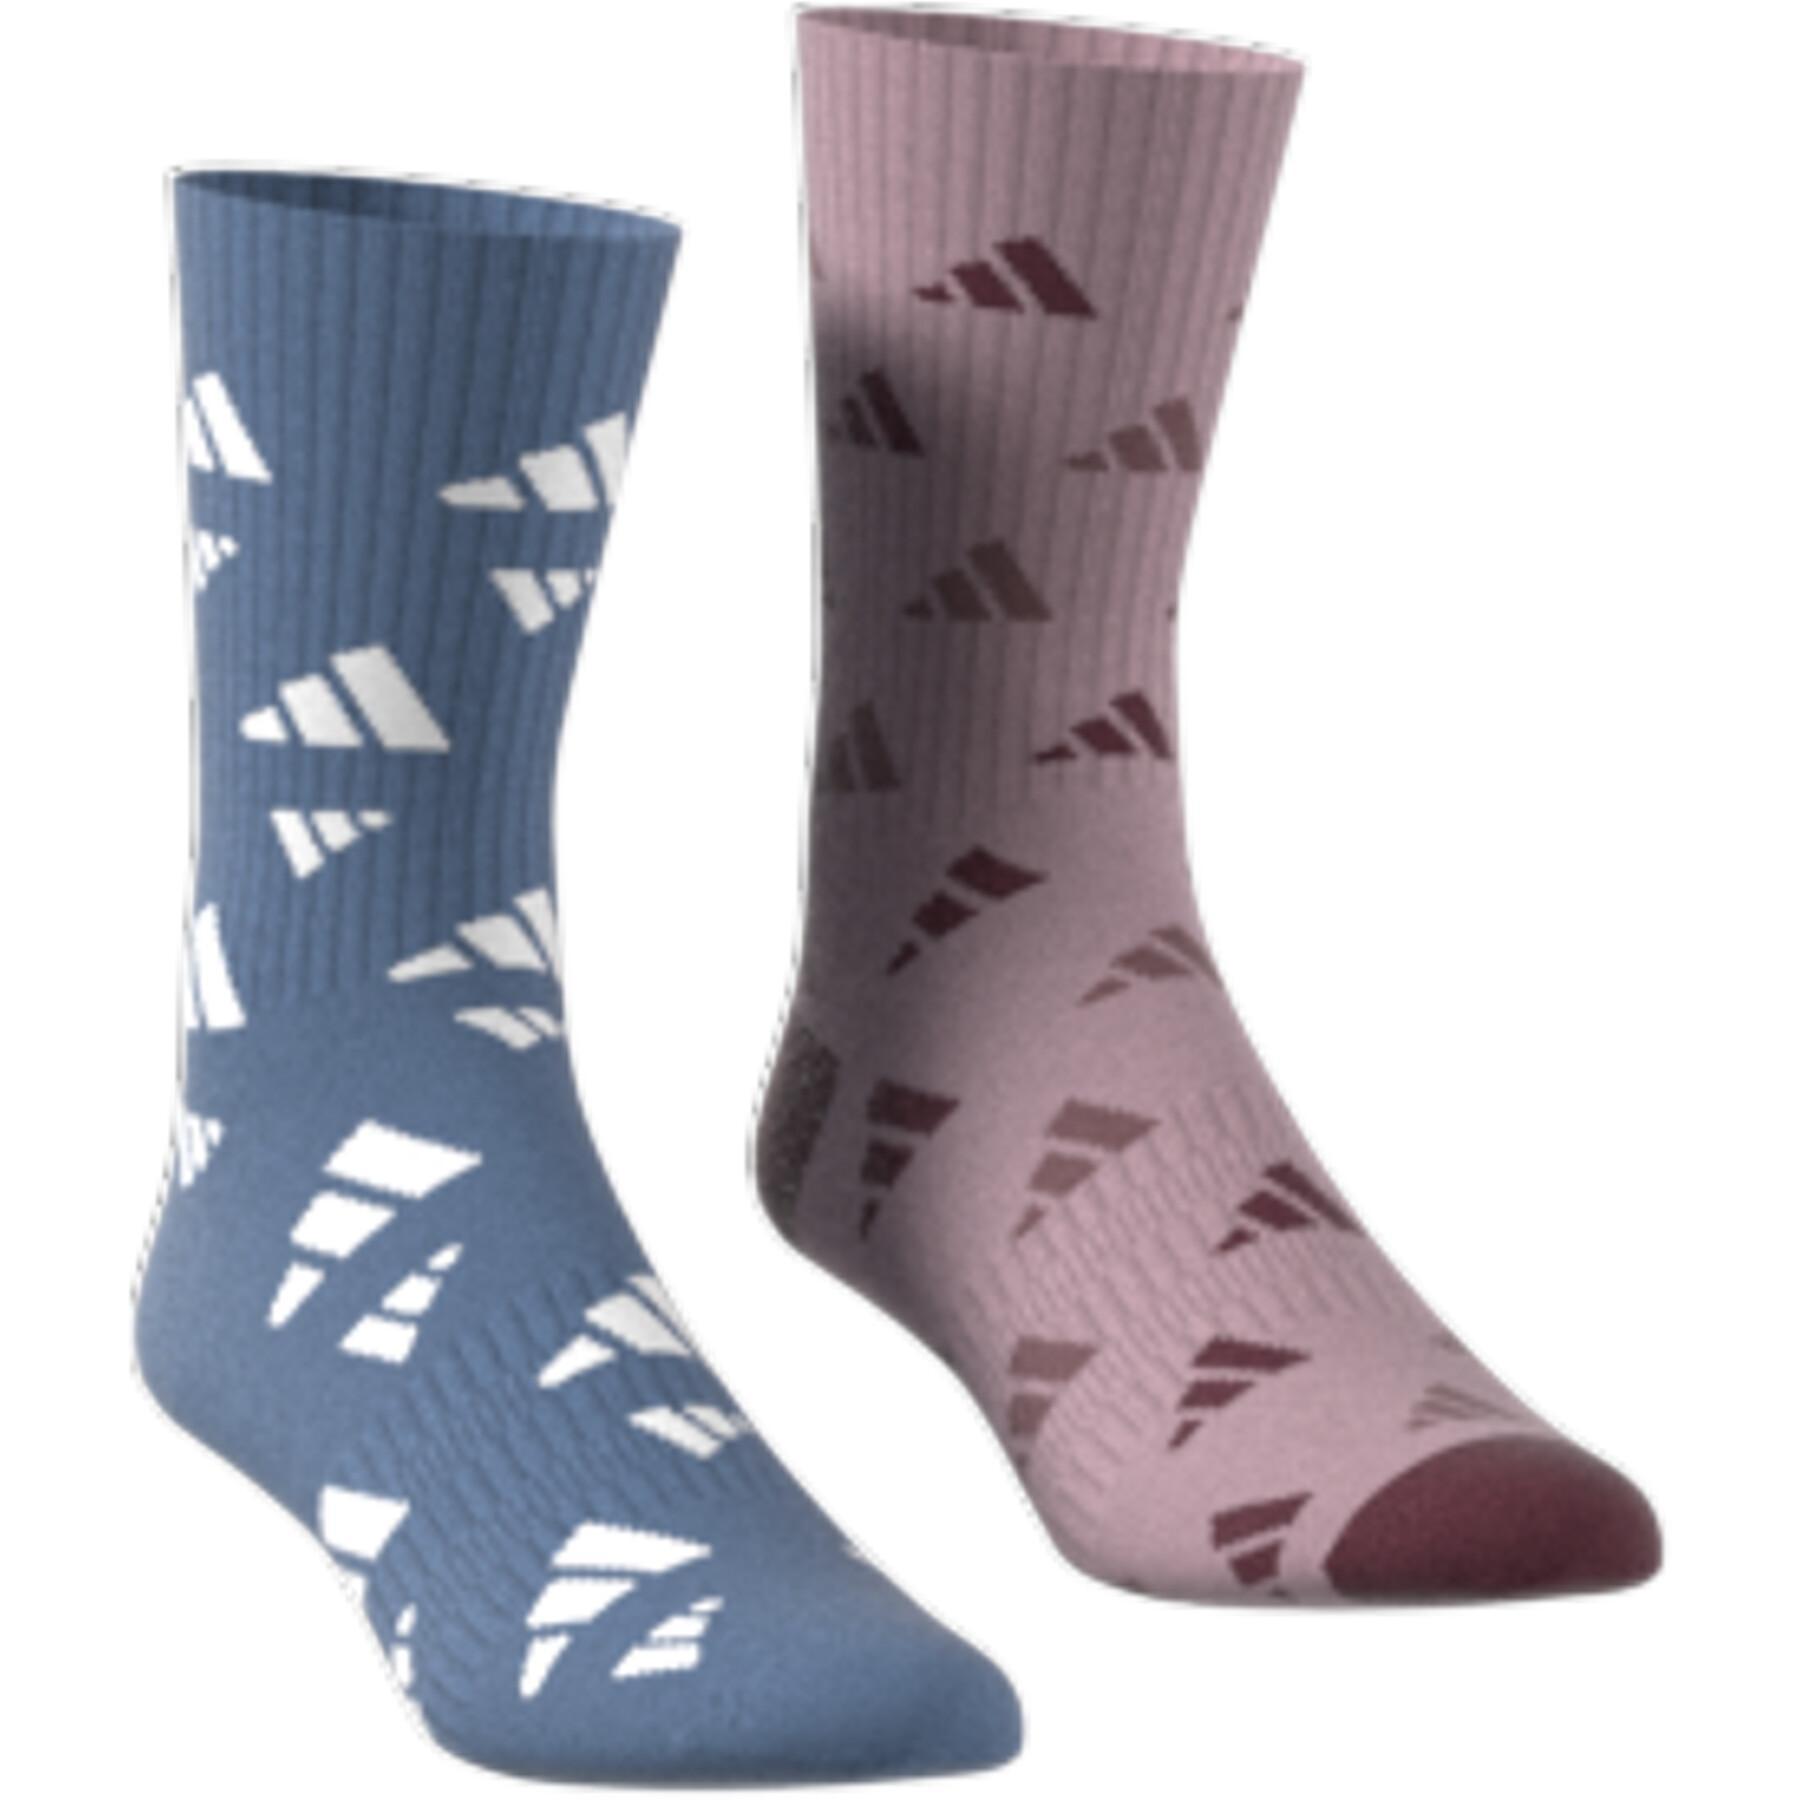 Chaussettes adidas Graphic (x2)